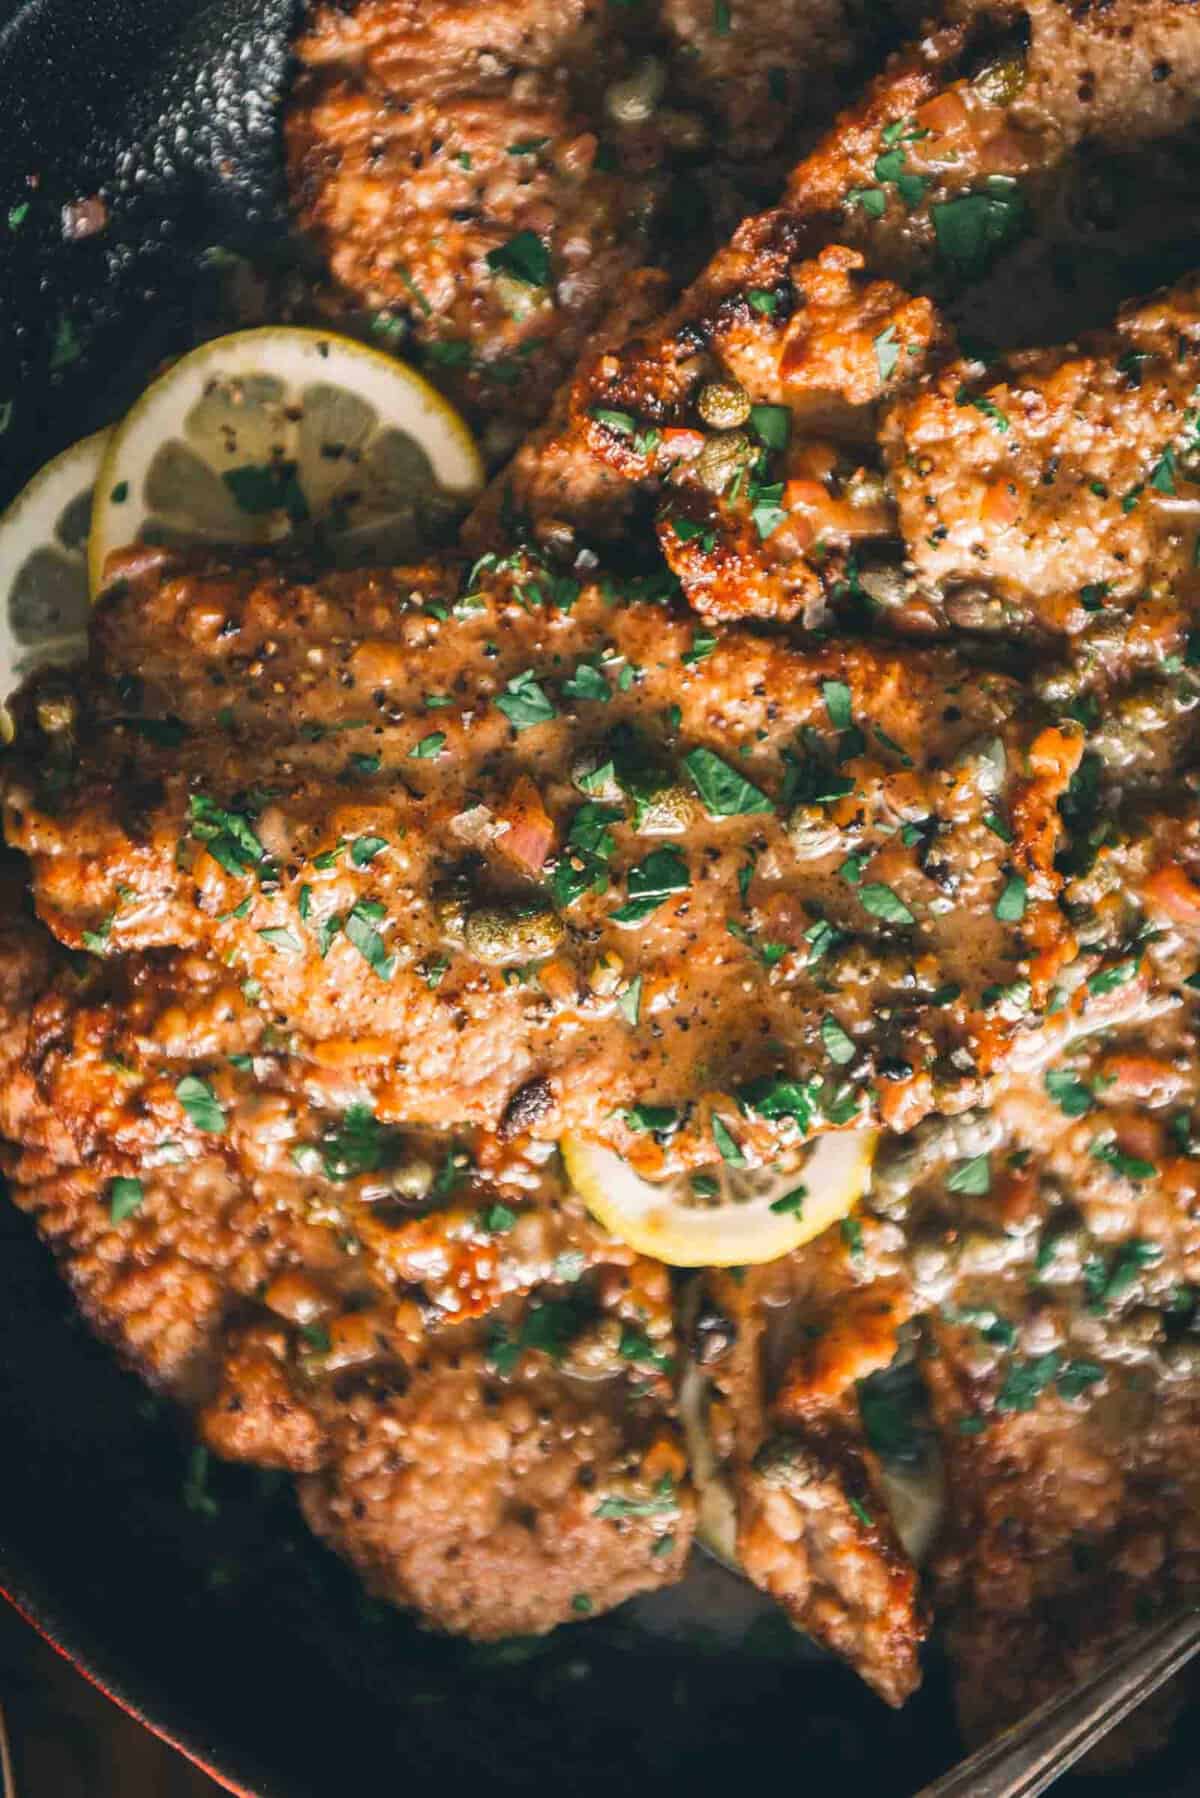 A skillet full of veal with lemon sauce and lemon wedges.